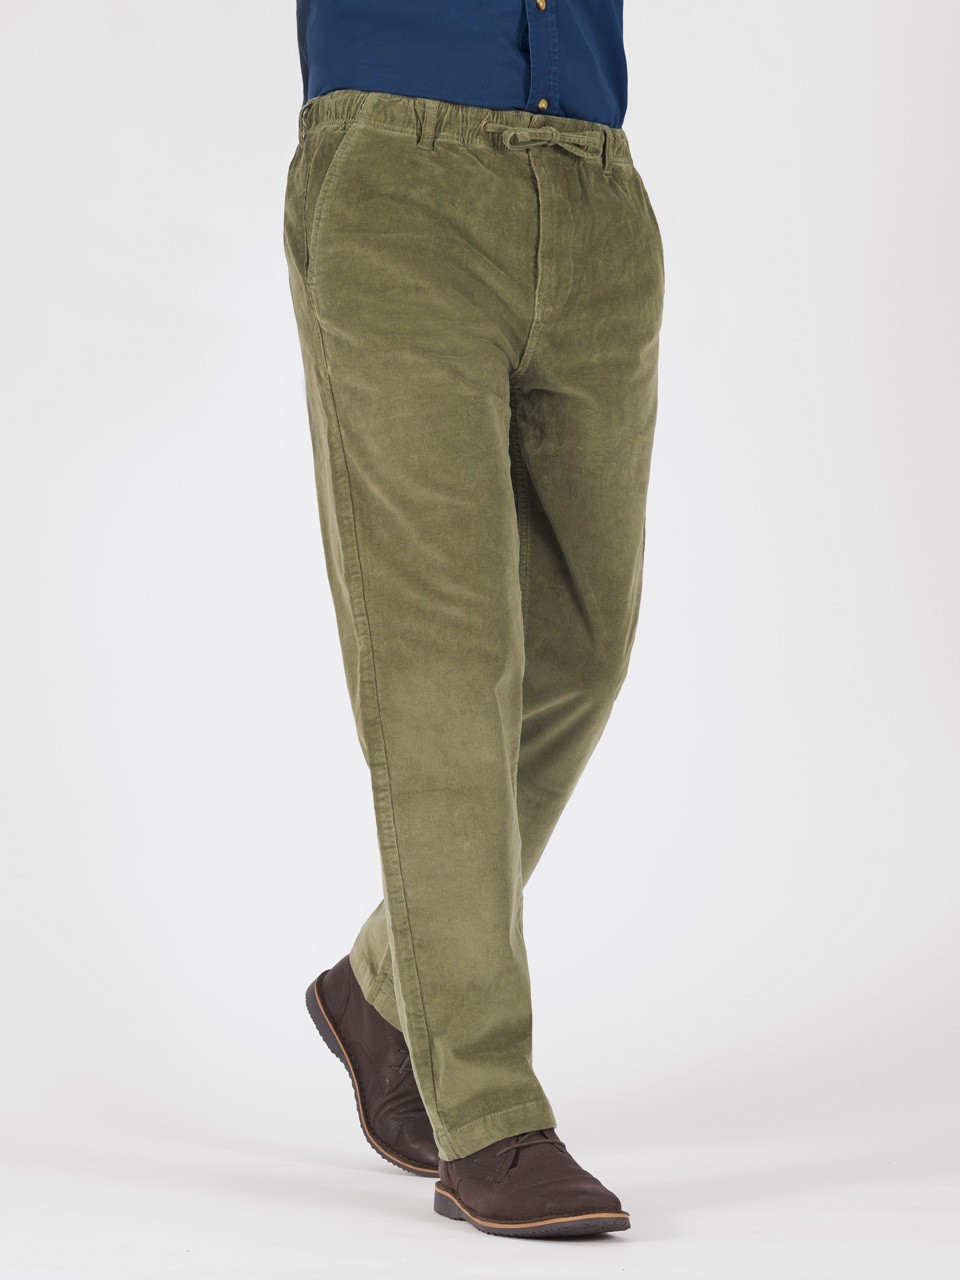 Caruso Green Slim Fit Tapered Cotton Blend Corduroy Suit Trousers